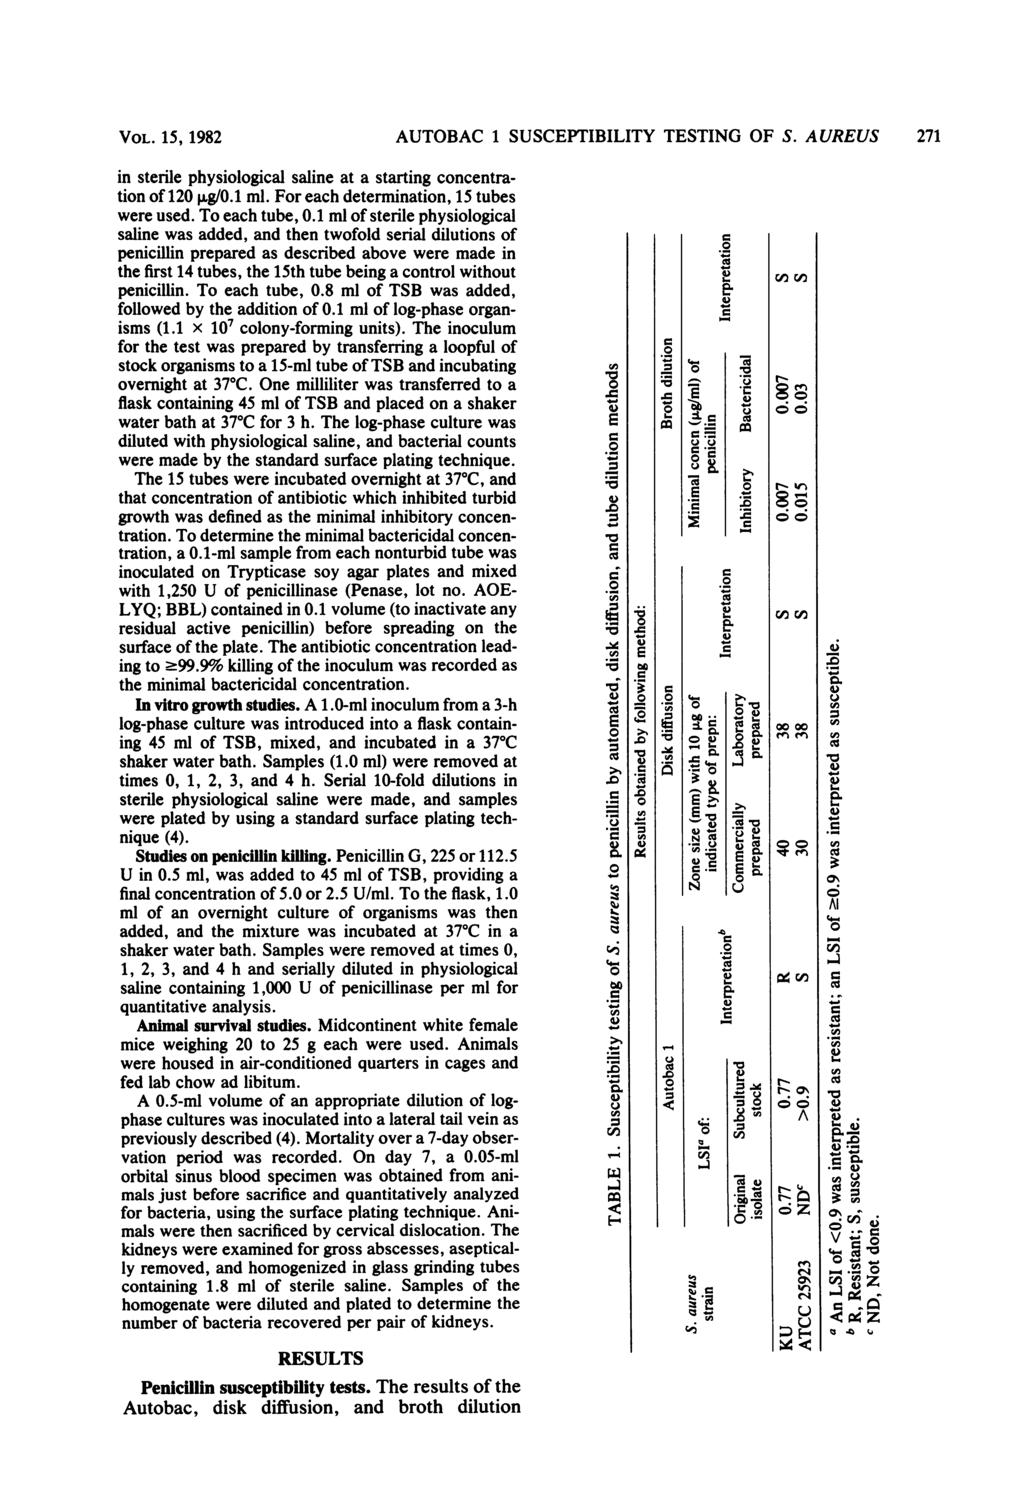 VOL. 15, 1982 AUTOBAC 1 SUSCEPTIBILITY TESTING OF S. AUREUS 271 in sterile physiological saline at a starting concentration of 12 ijg/.1 ml. For each determination, 15 tubes were used. To each tube,.